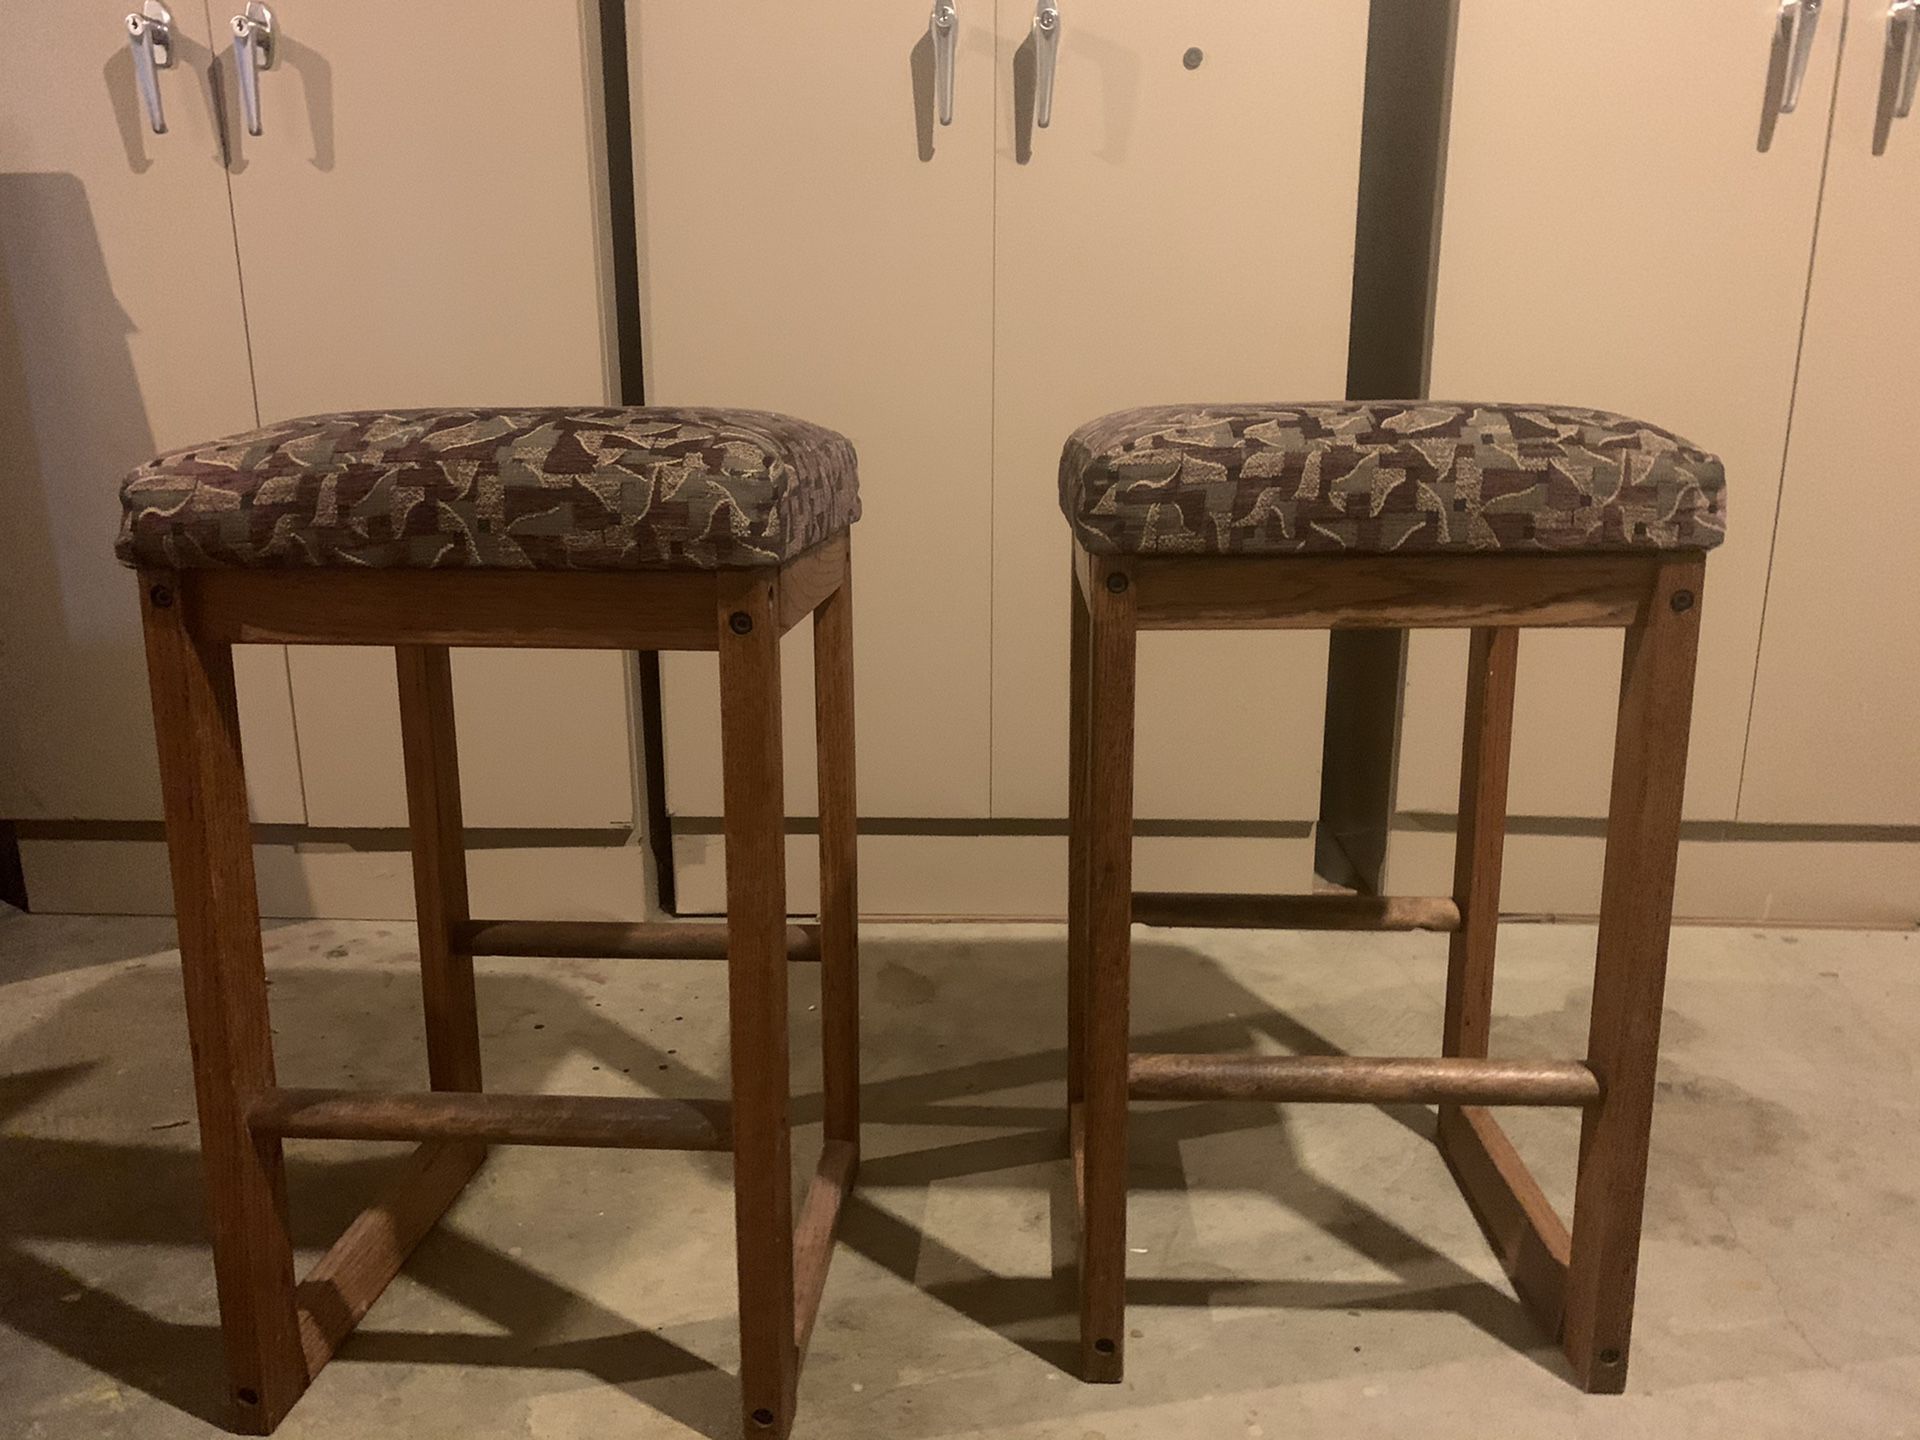 Wooden Stools - sturdy, comfortable, in excellent condition